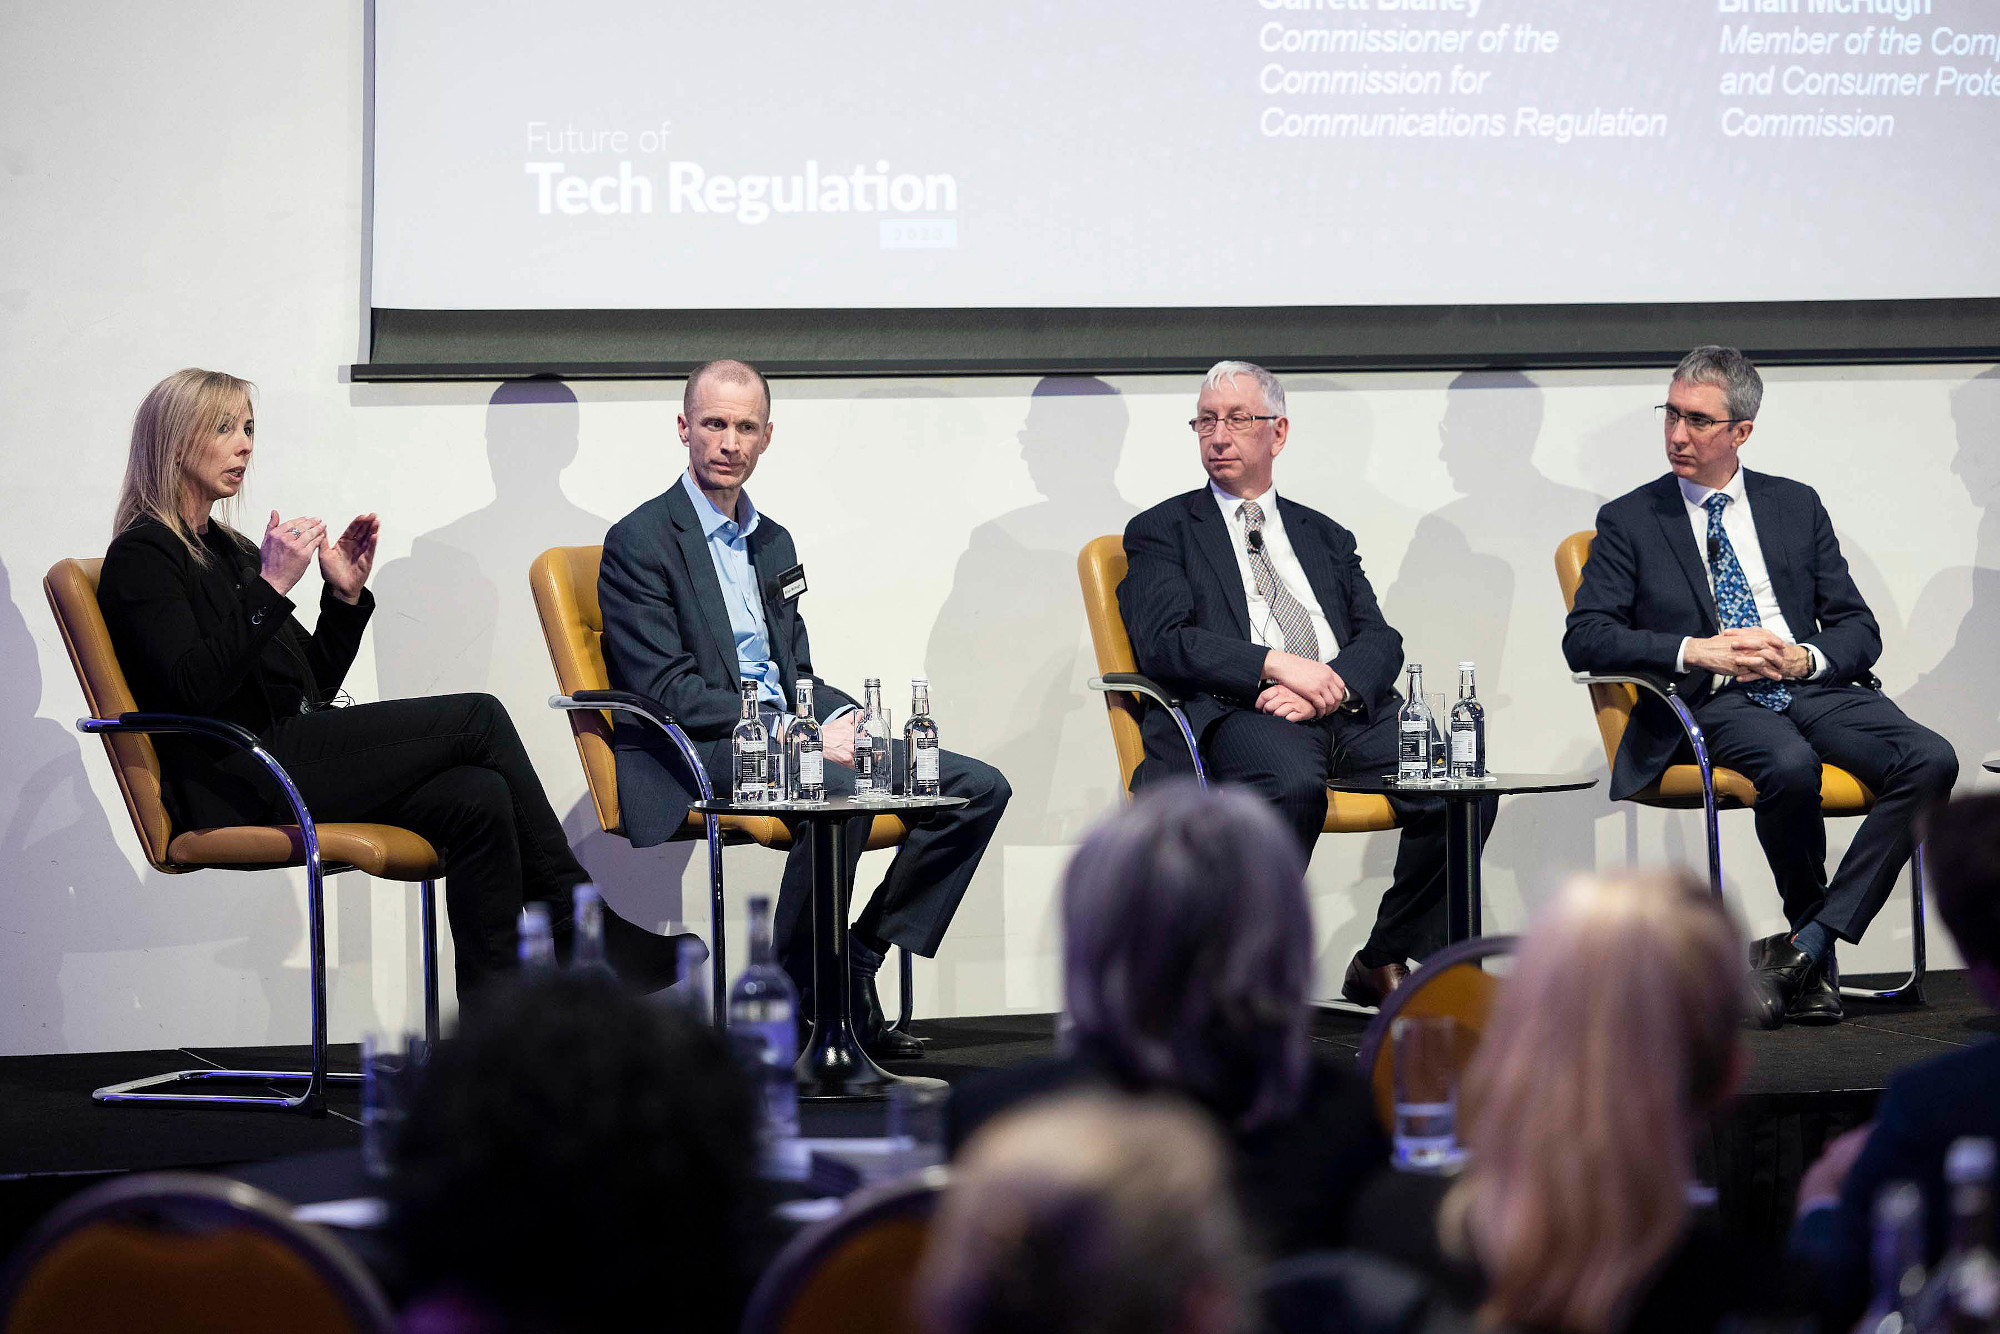 #InPictures: A&L Goodbody hosts first-of-its-kind future of tech regulation event